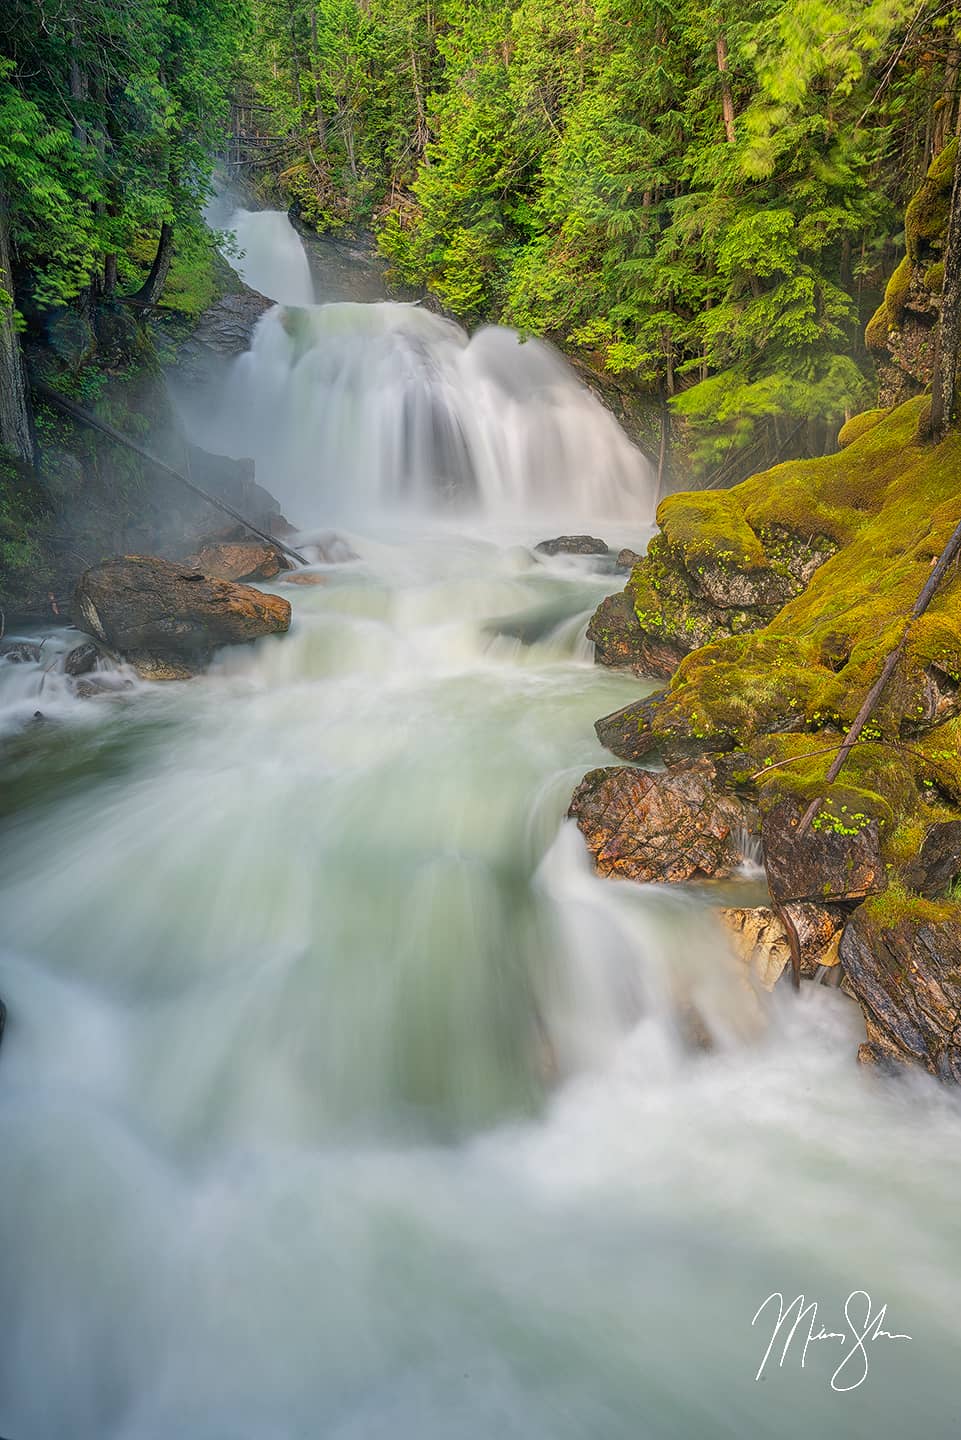 Open edition fine art print of Crazy Creek Falls in southern British Columbia